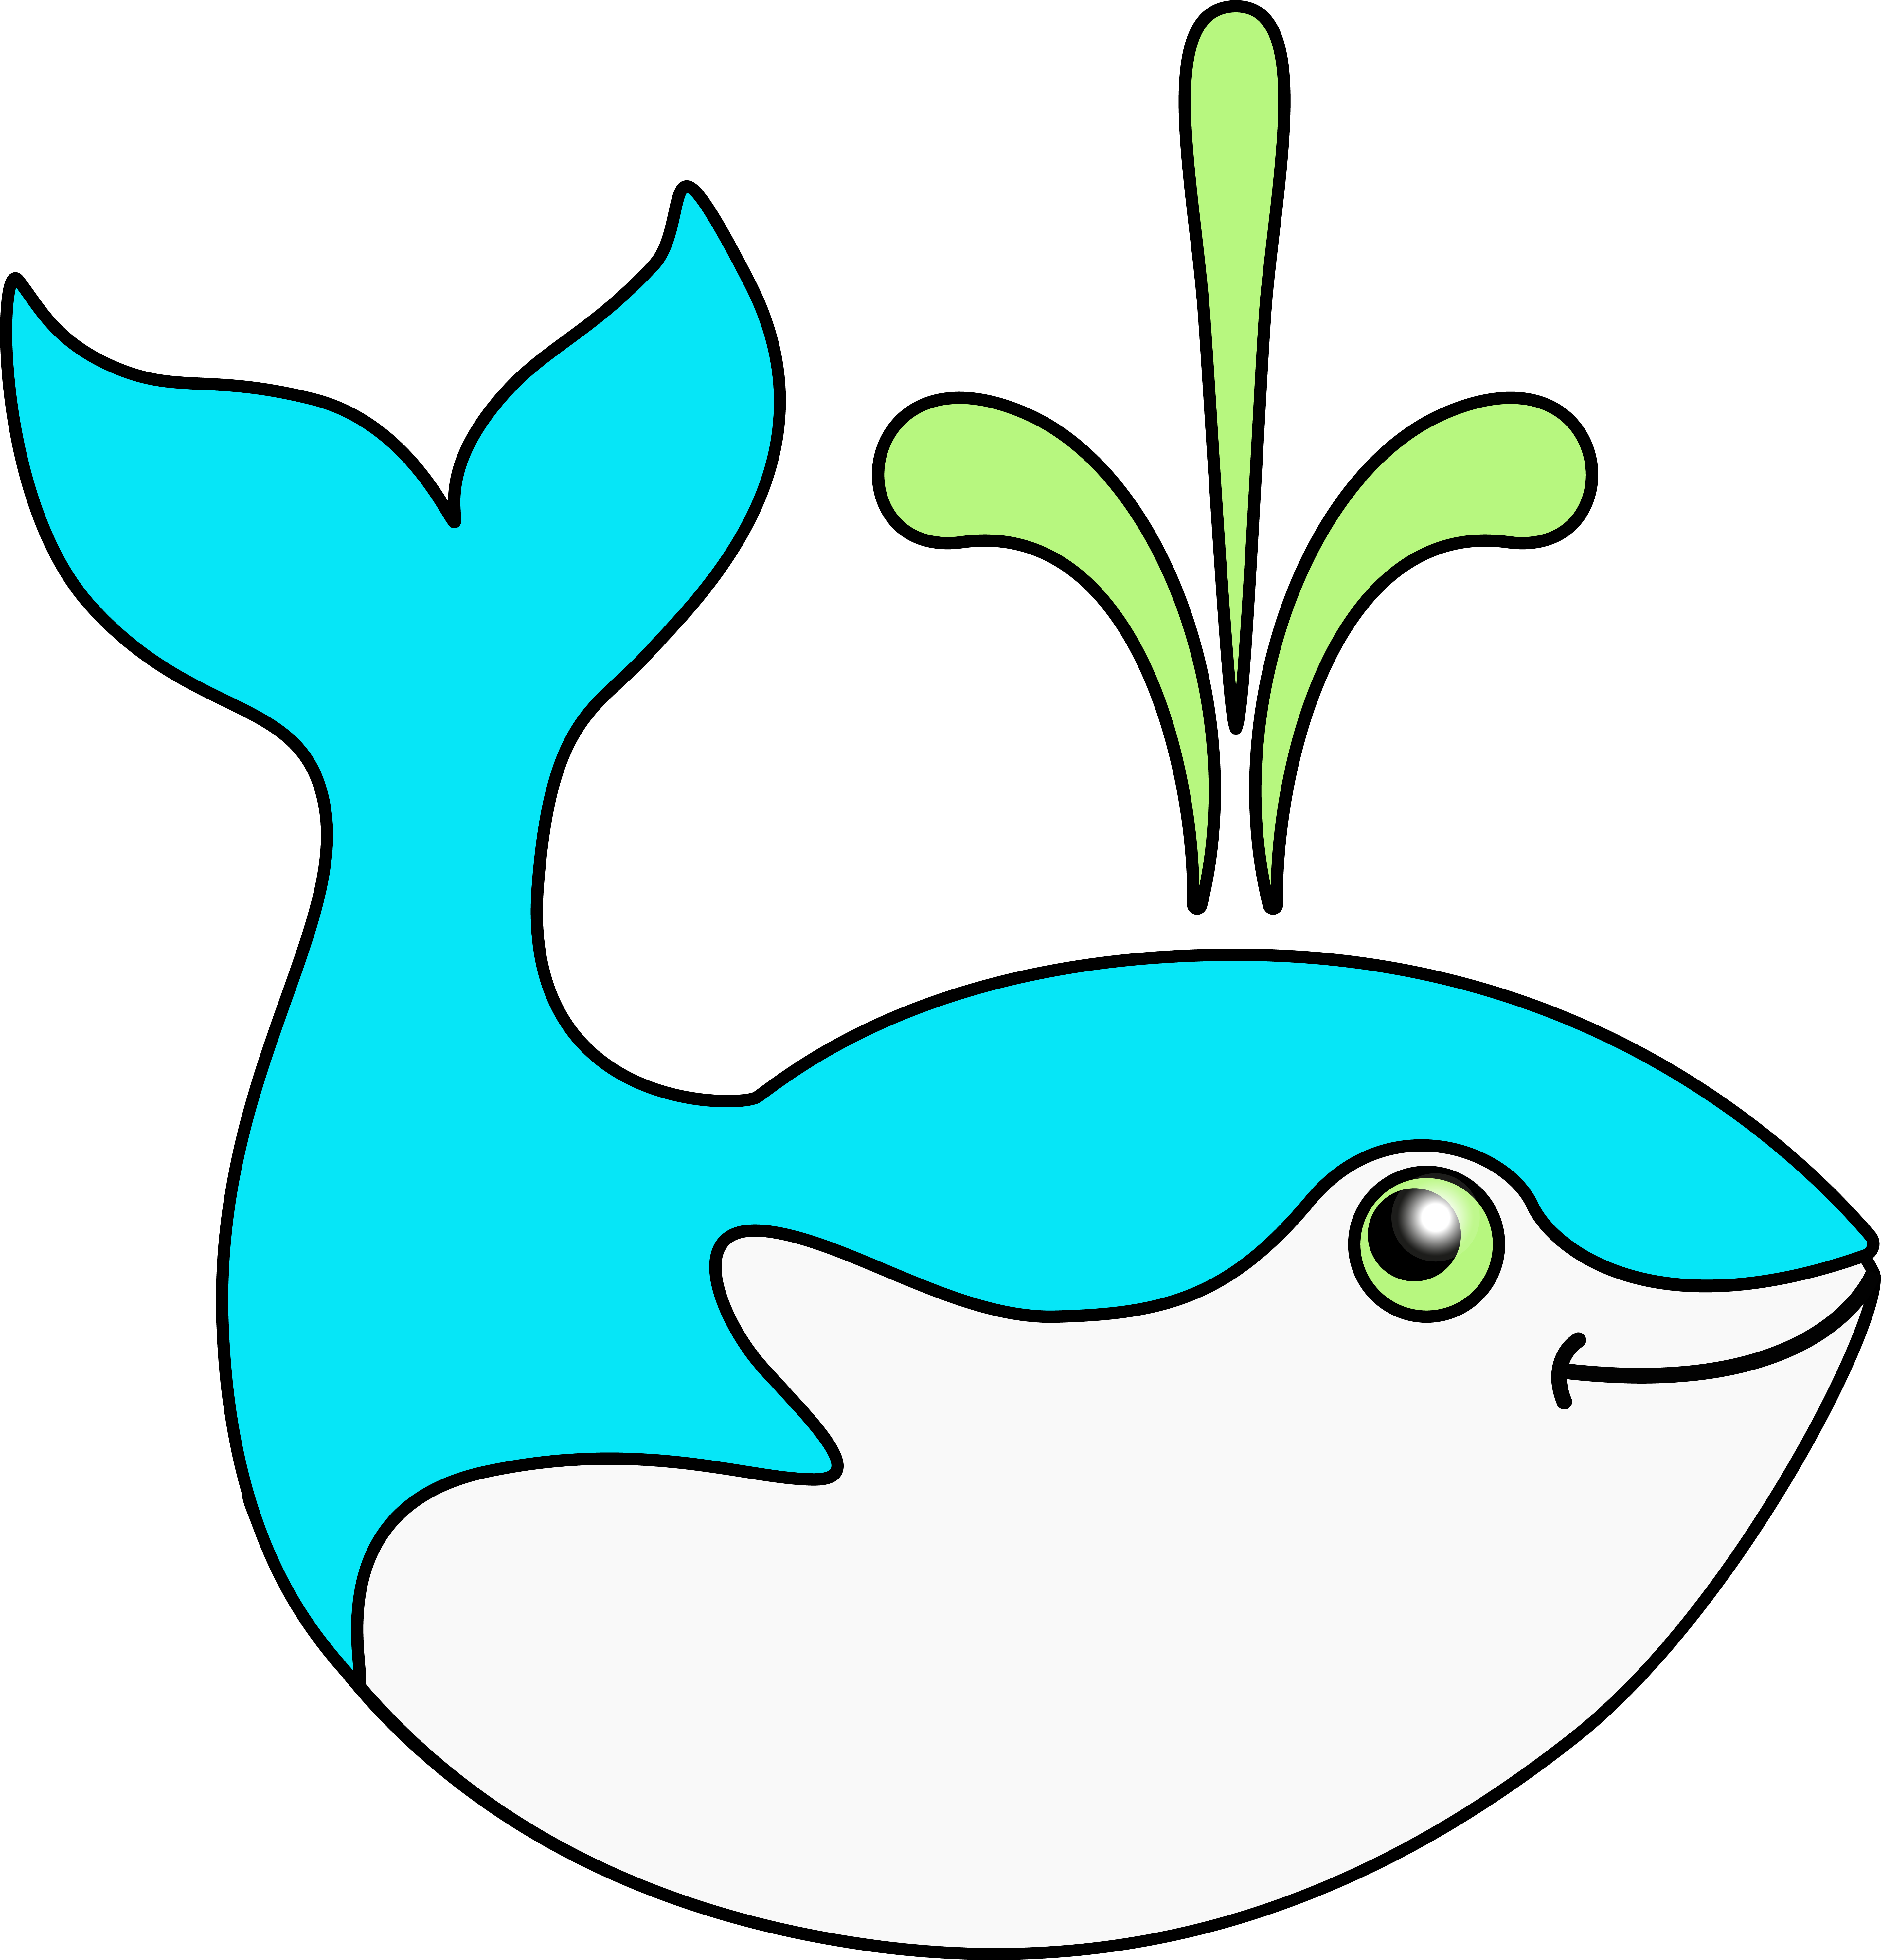 Blue and white whale with a green tail.